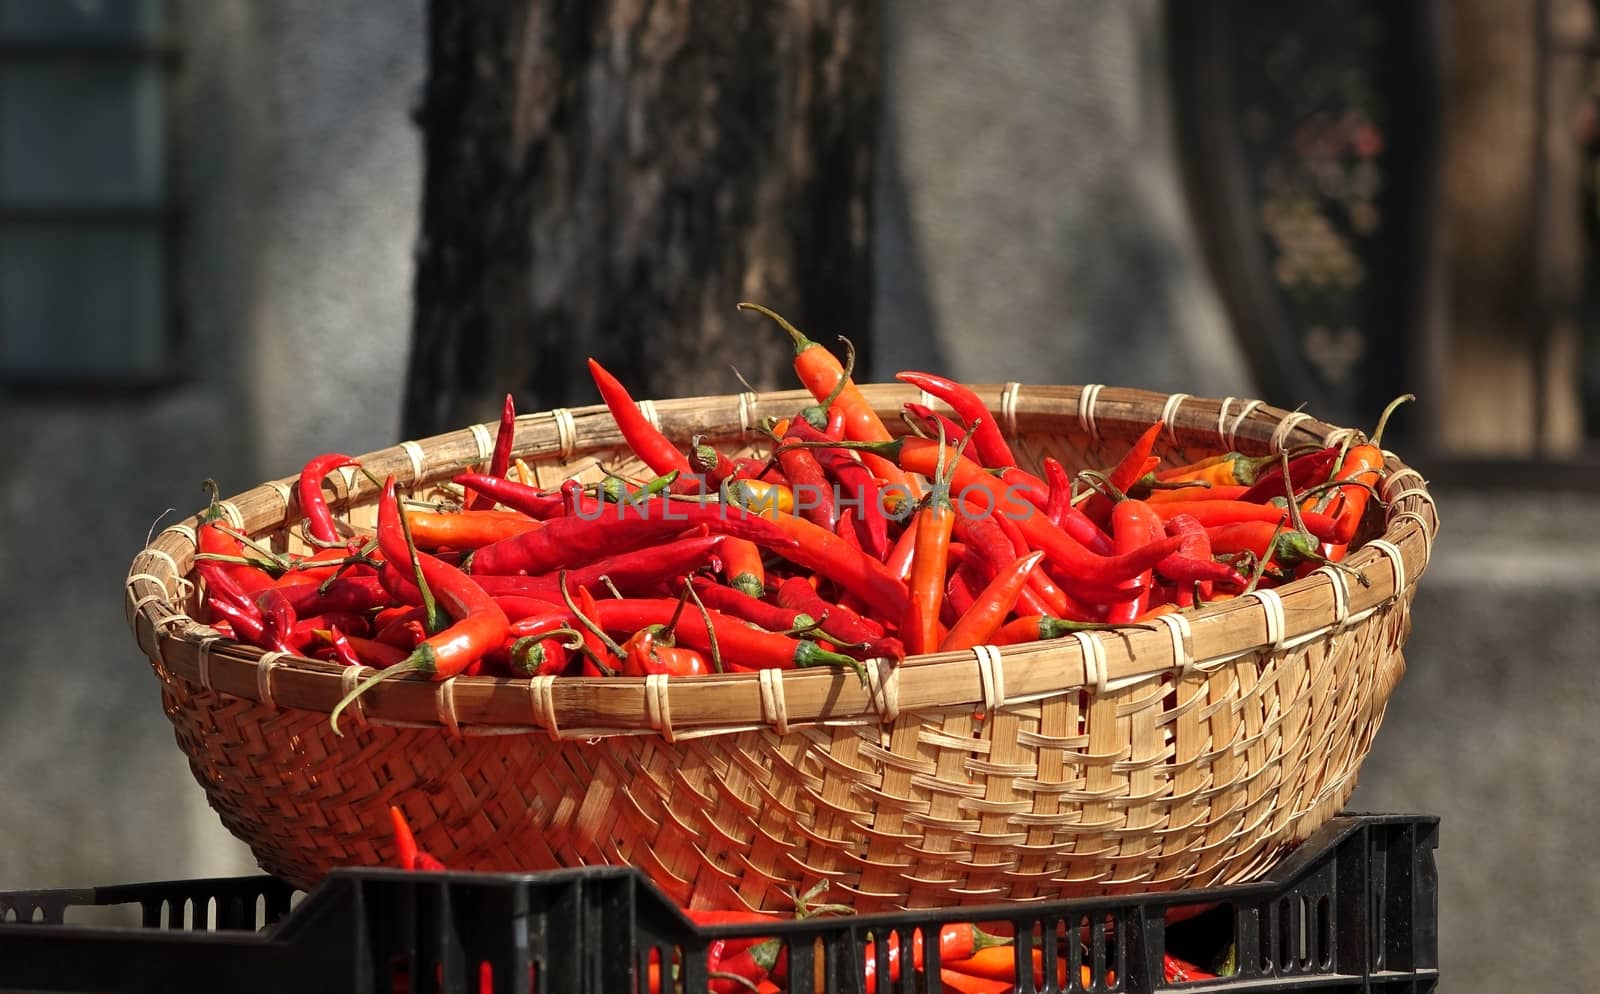 Basket with Red Chili Peppers by shiyali